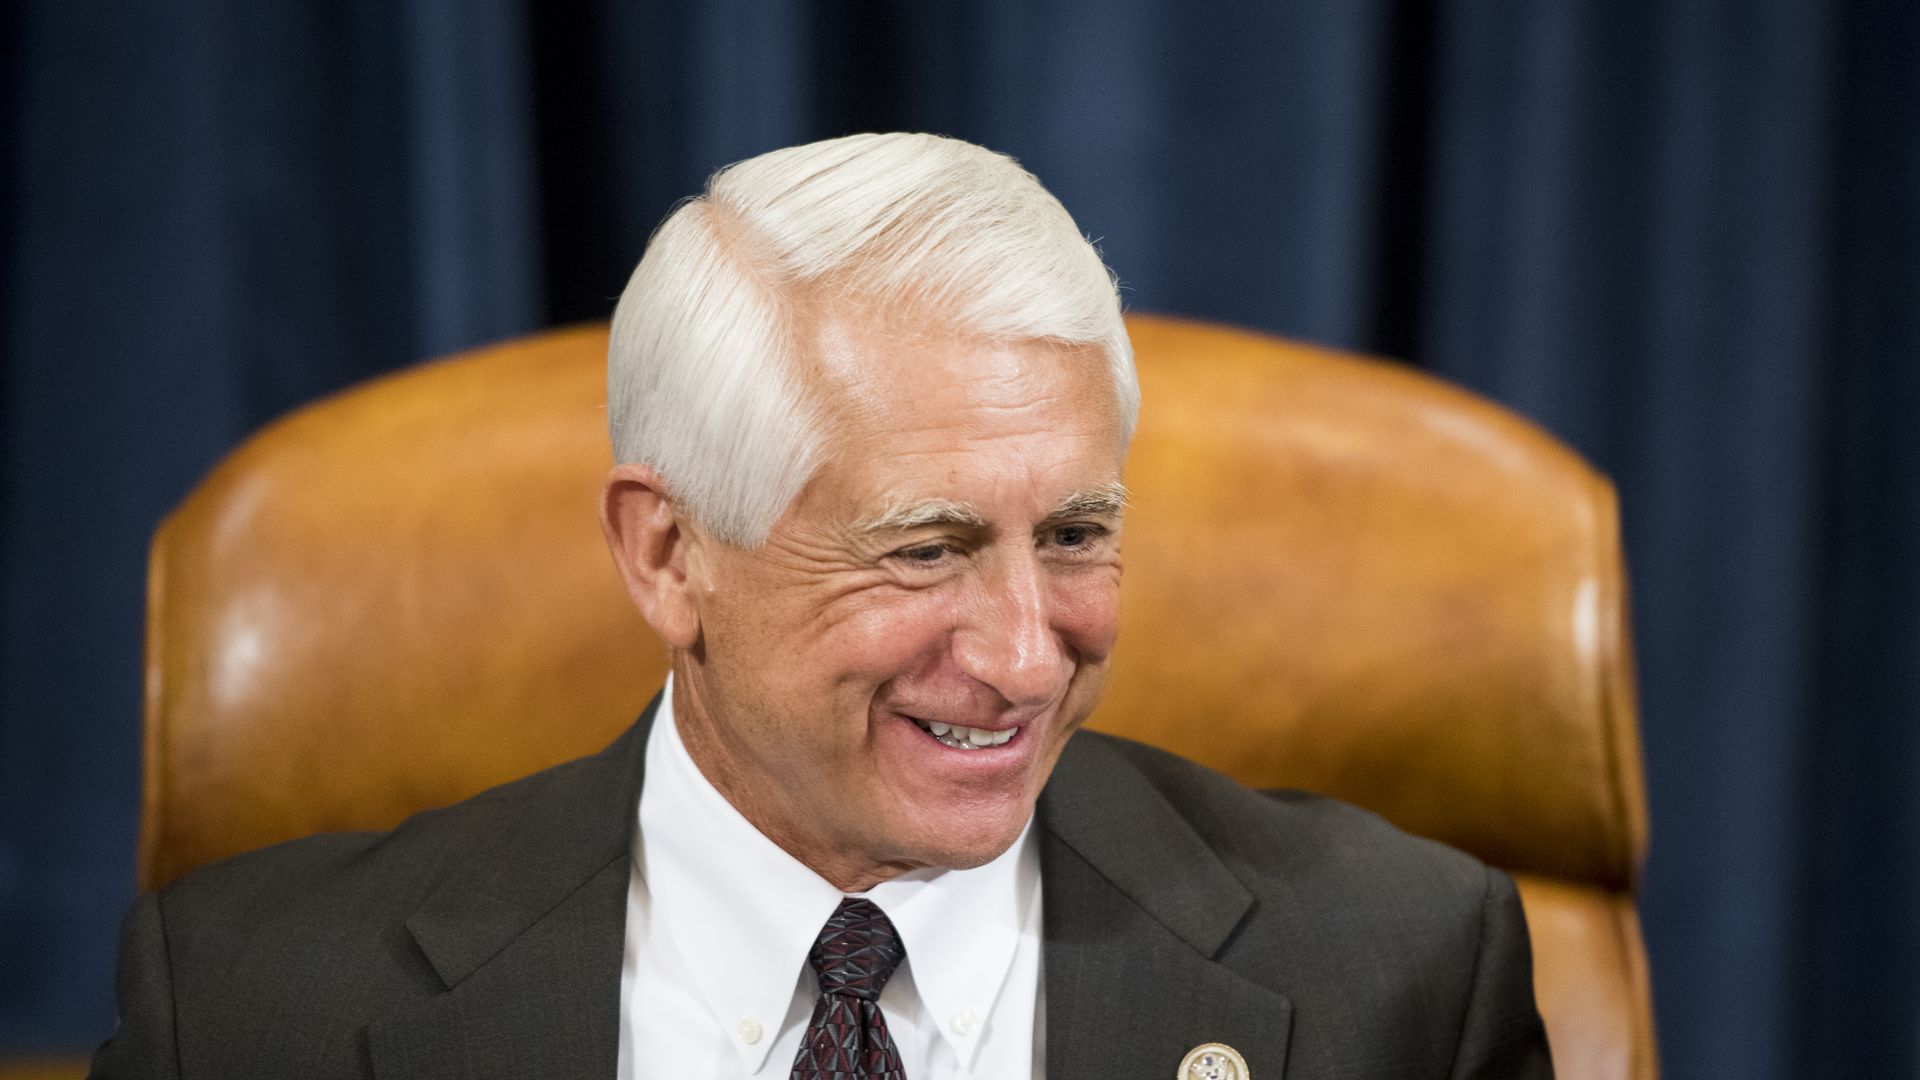 Image of silver-haired politician smiling. 